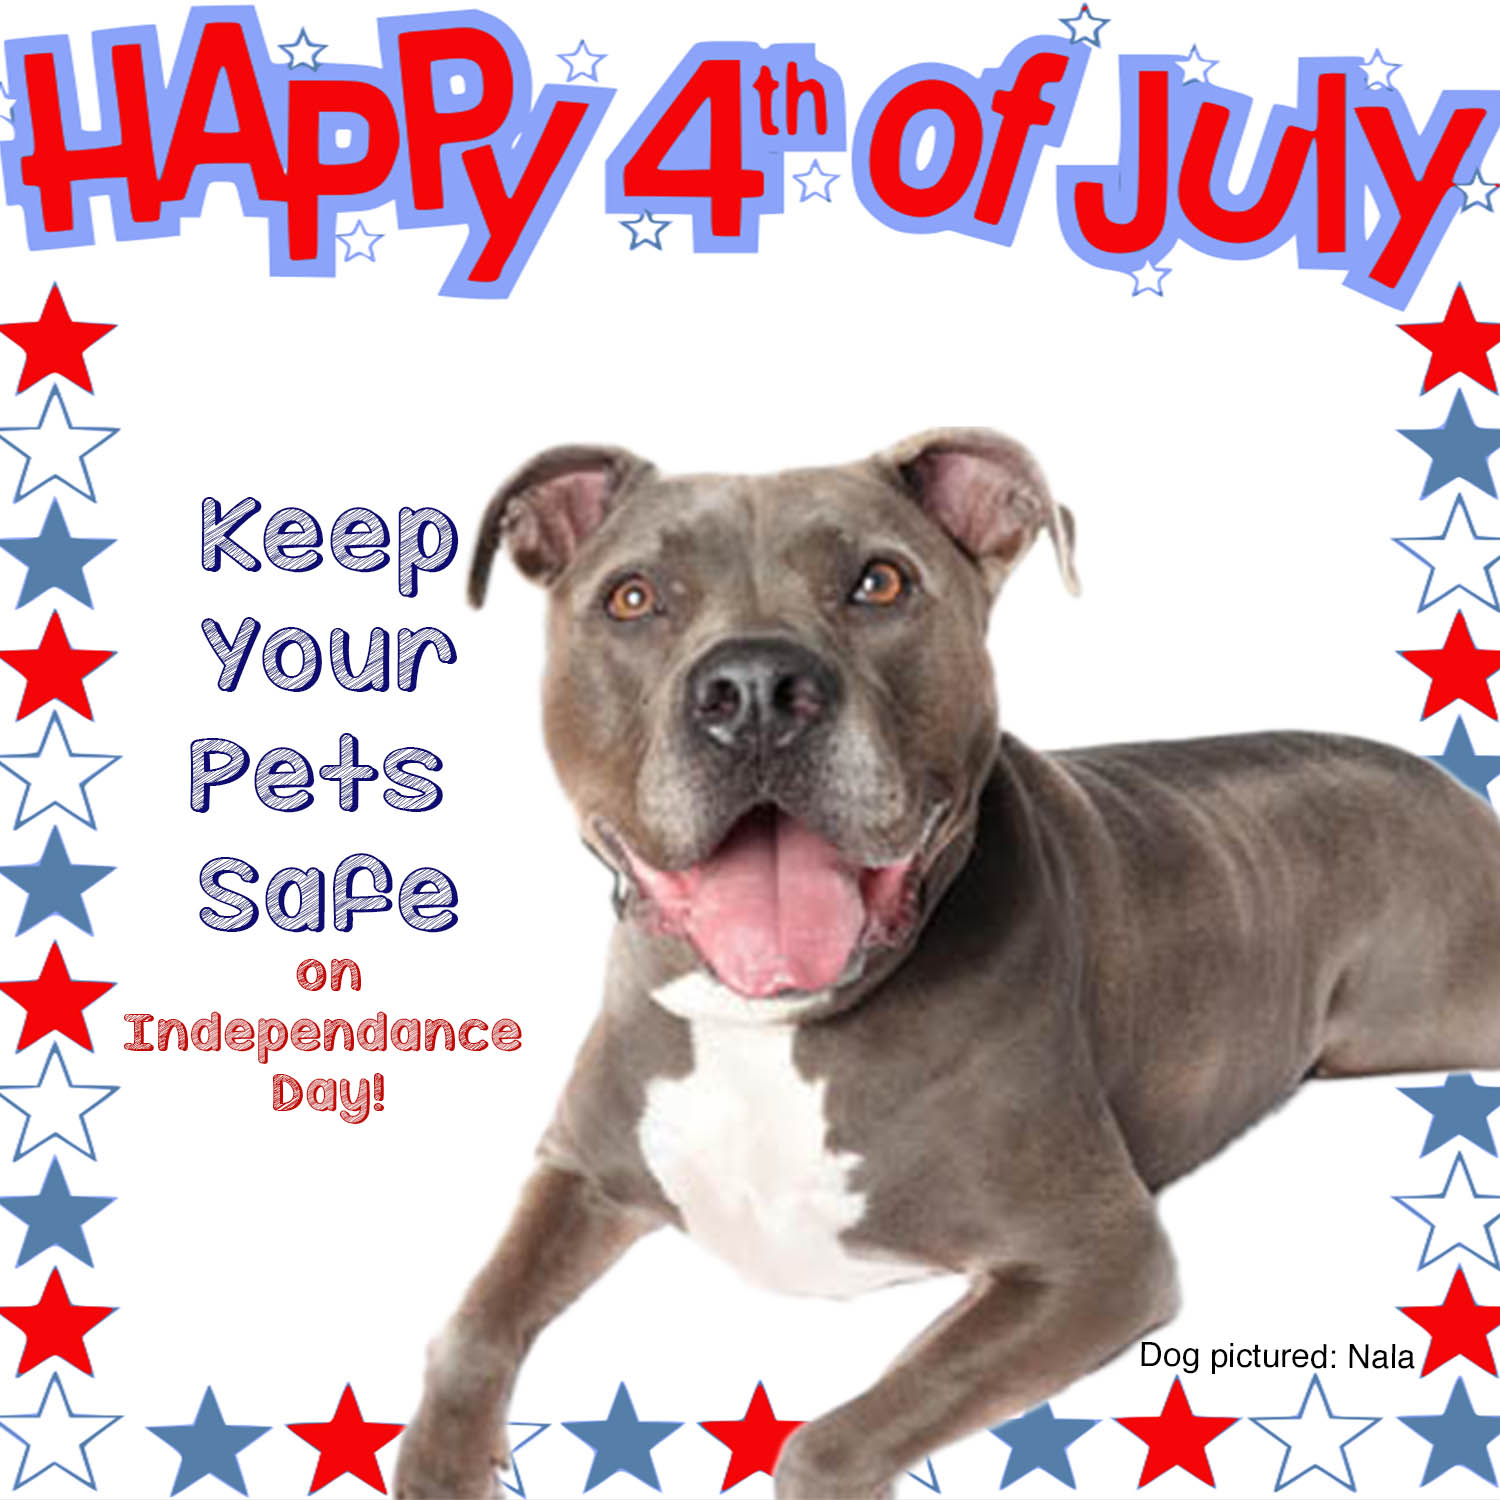 Keep Your Dog Busy, Happy & Safe with Bully Buddy this 4th of July!